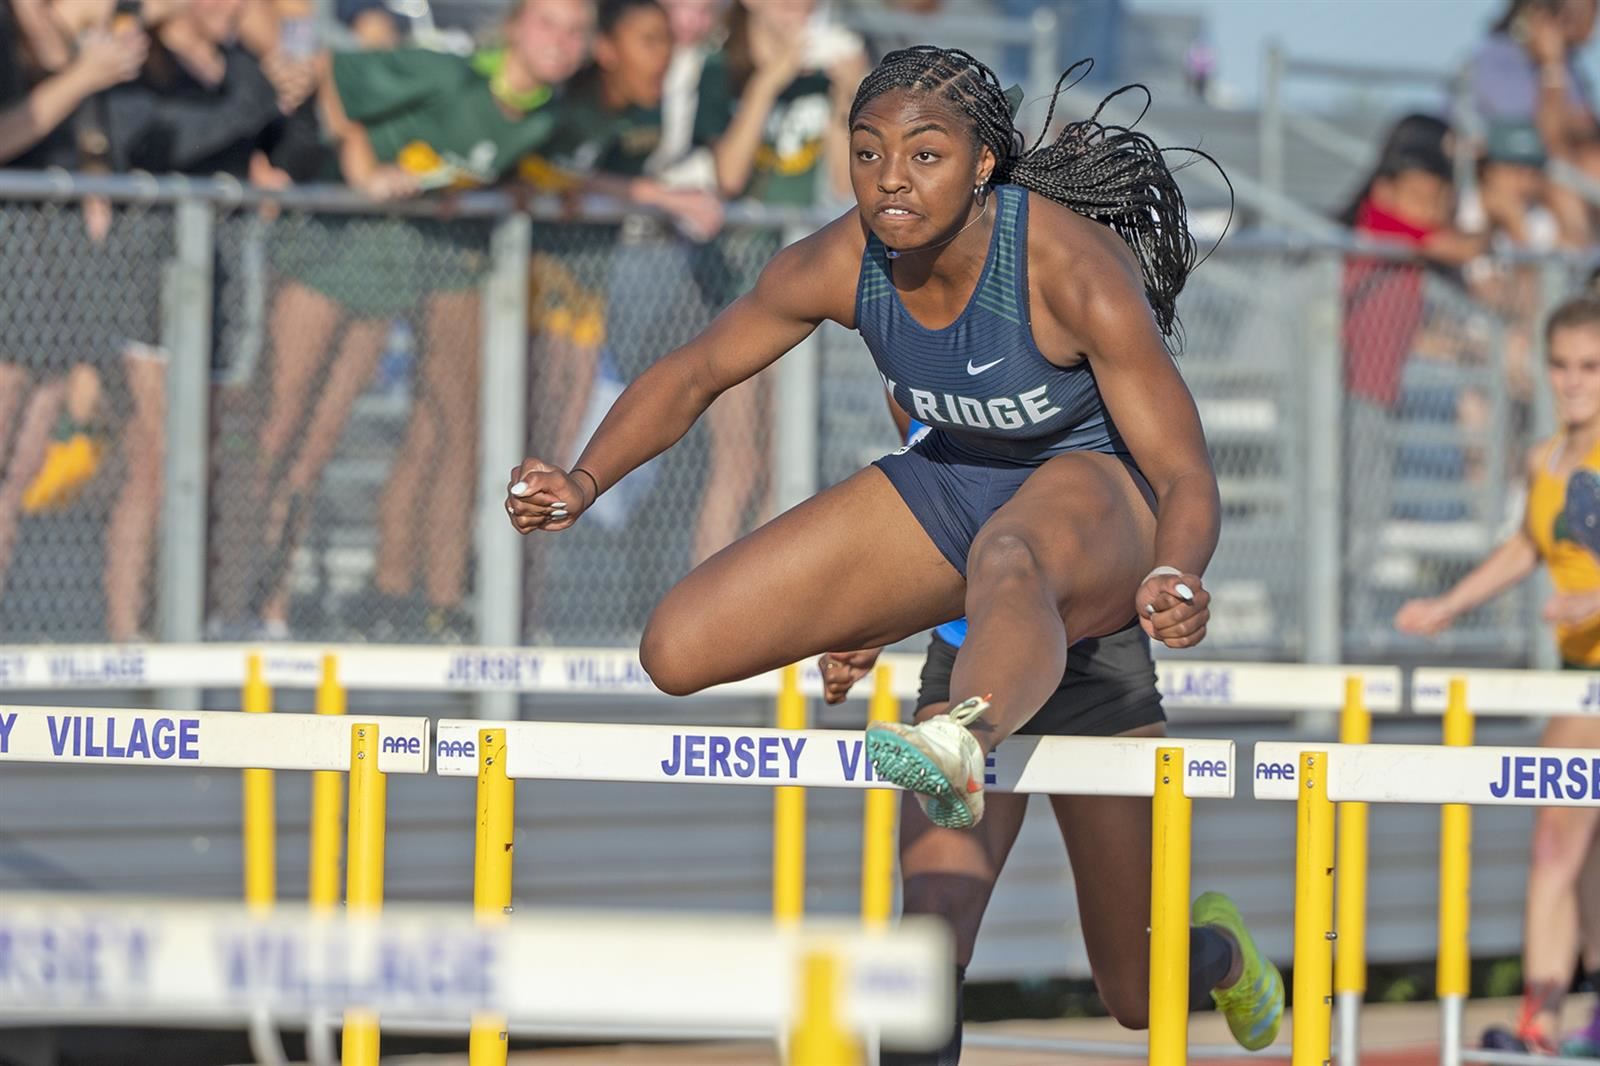 Cypress Ridge High School sophomore Rylee Hampton qualified for the UIL Track and Field State Meet in two events.